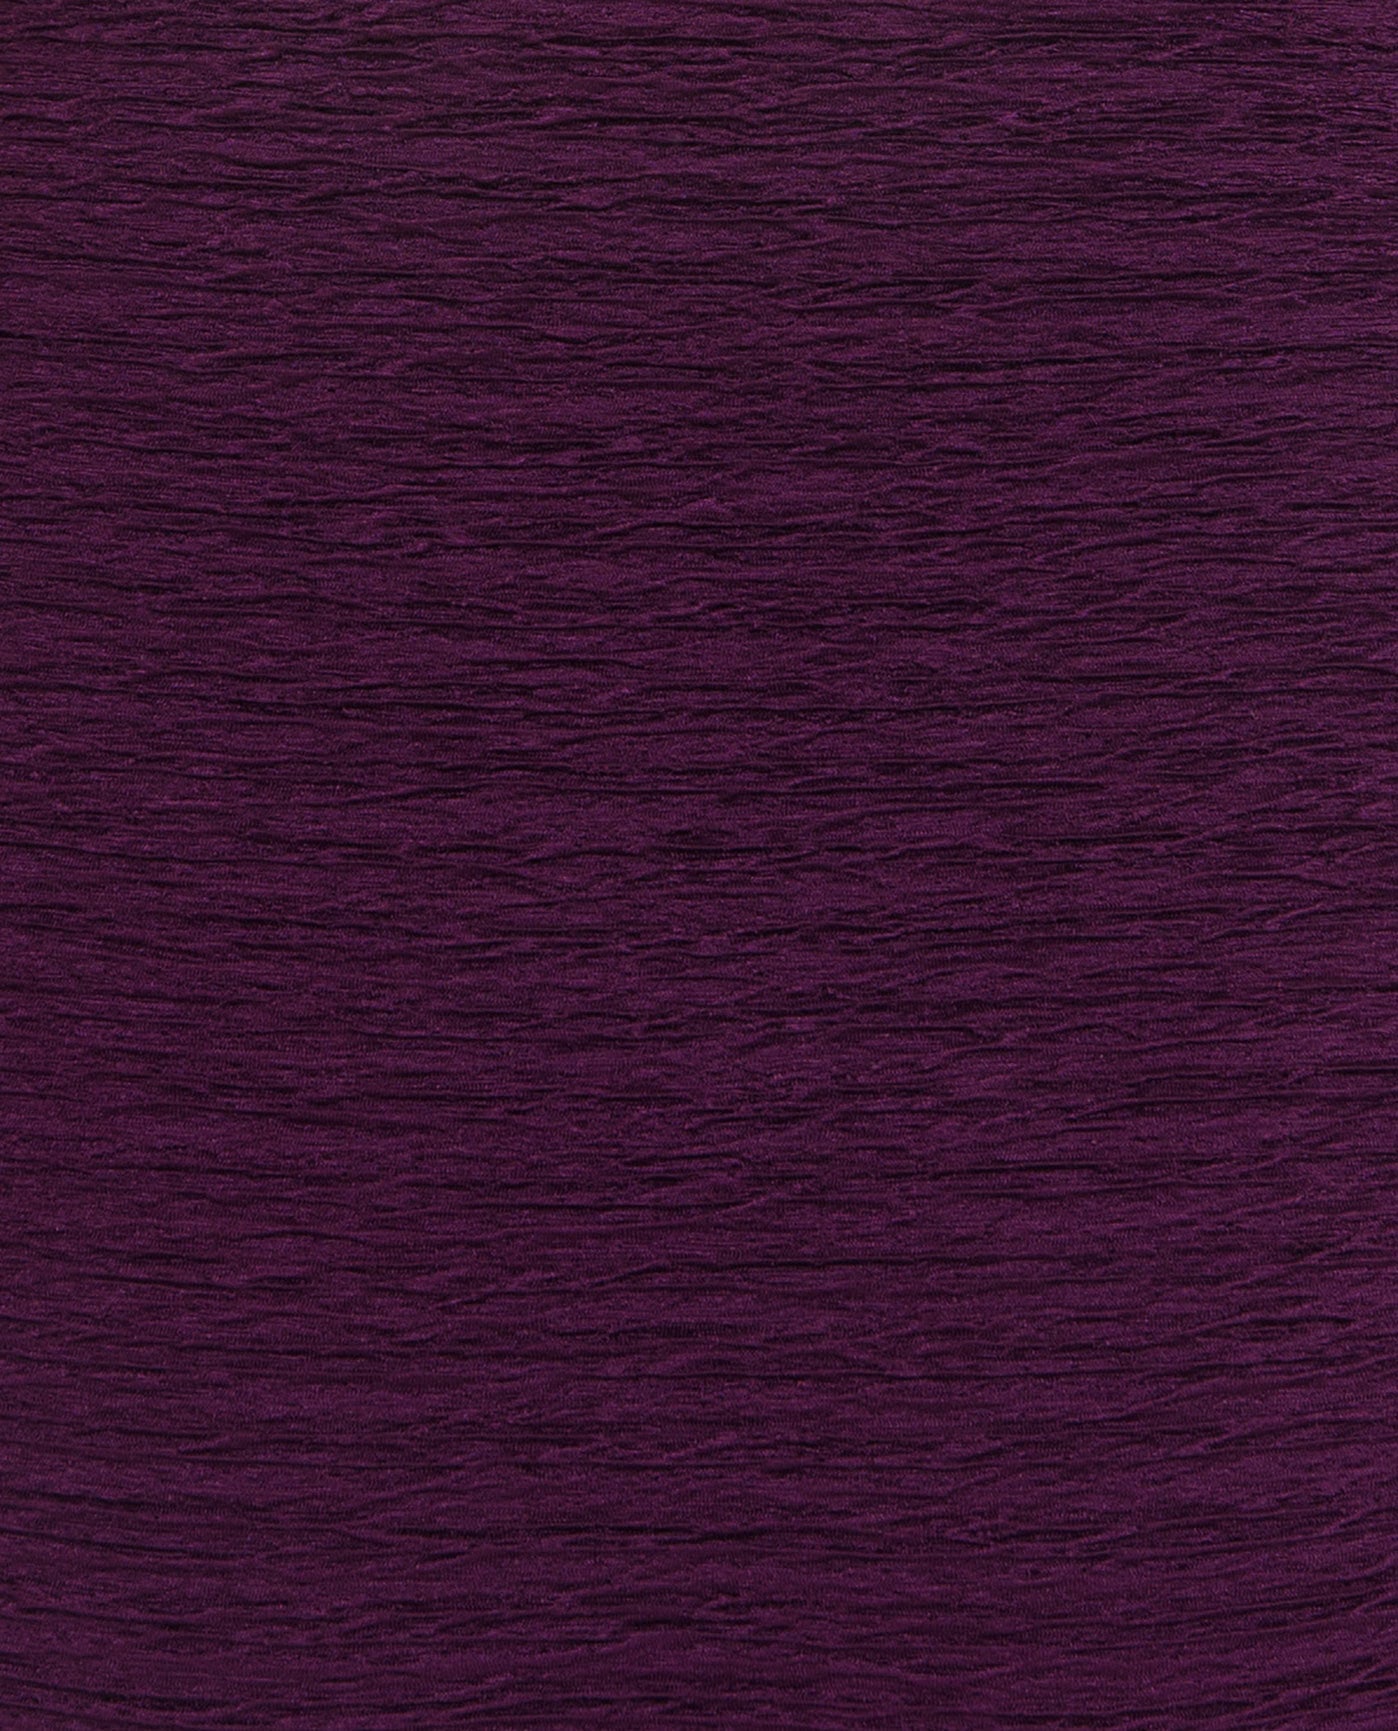 FABRIC SWATCH VIEW OF CHLORINE RESISTANT KRINKLE TEXTURED SOLID HIGH NECK PLUS SIZE ONE PIECE | KRINKLE EGGPLANT